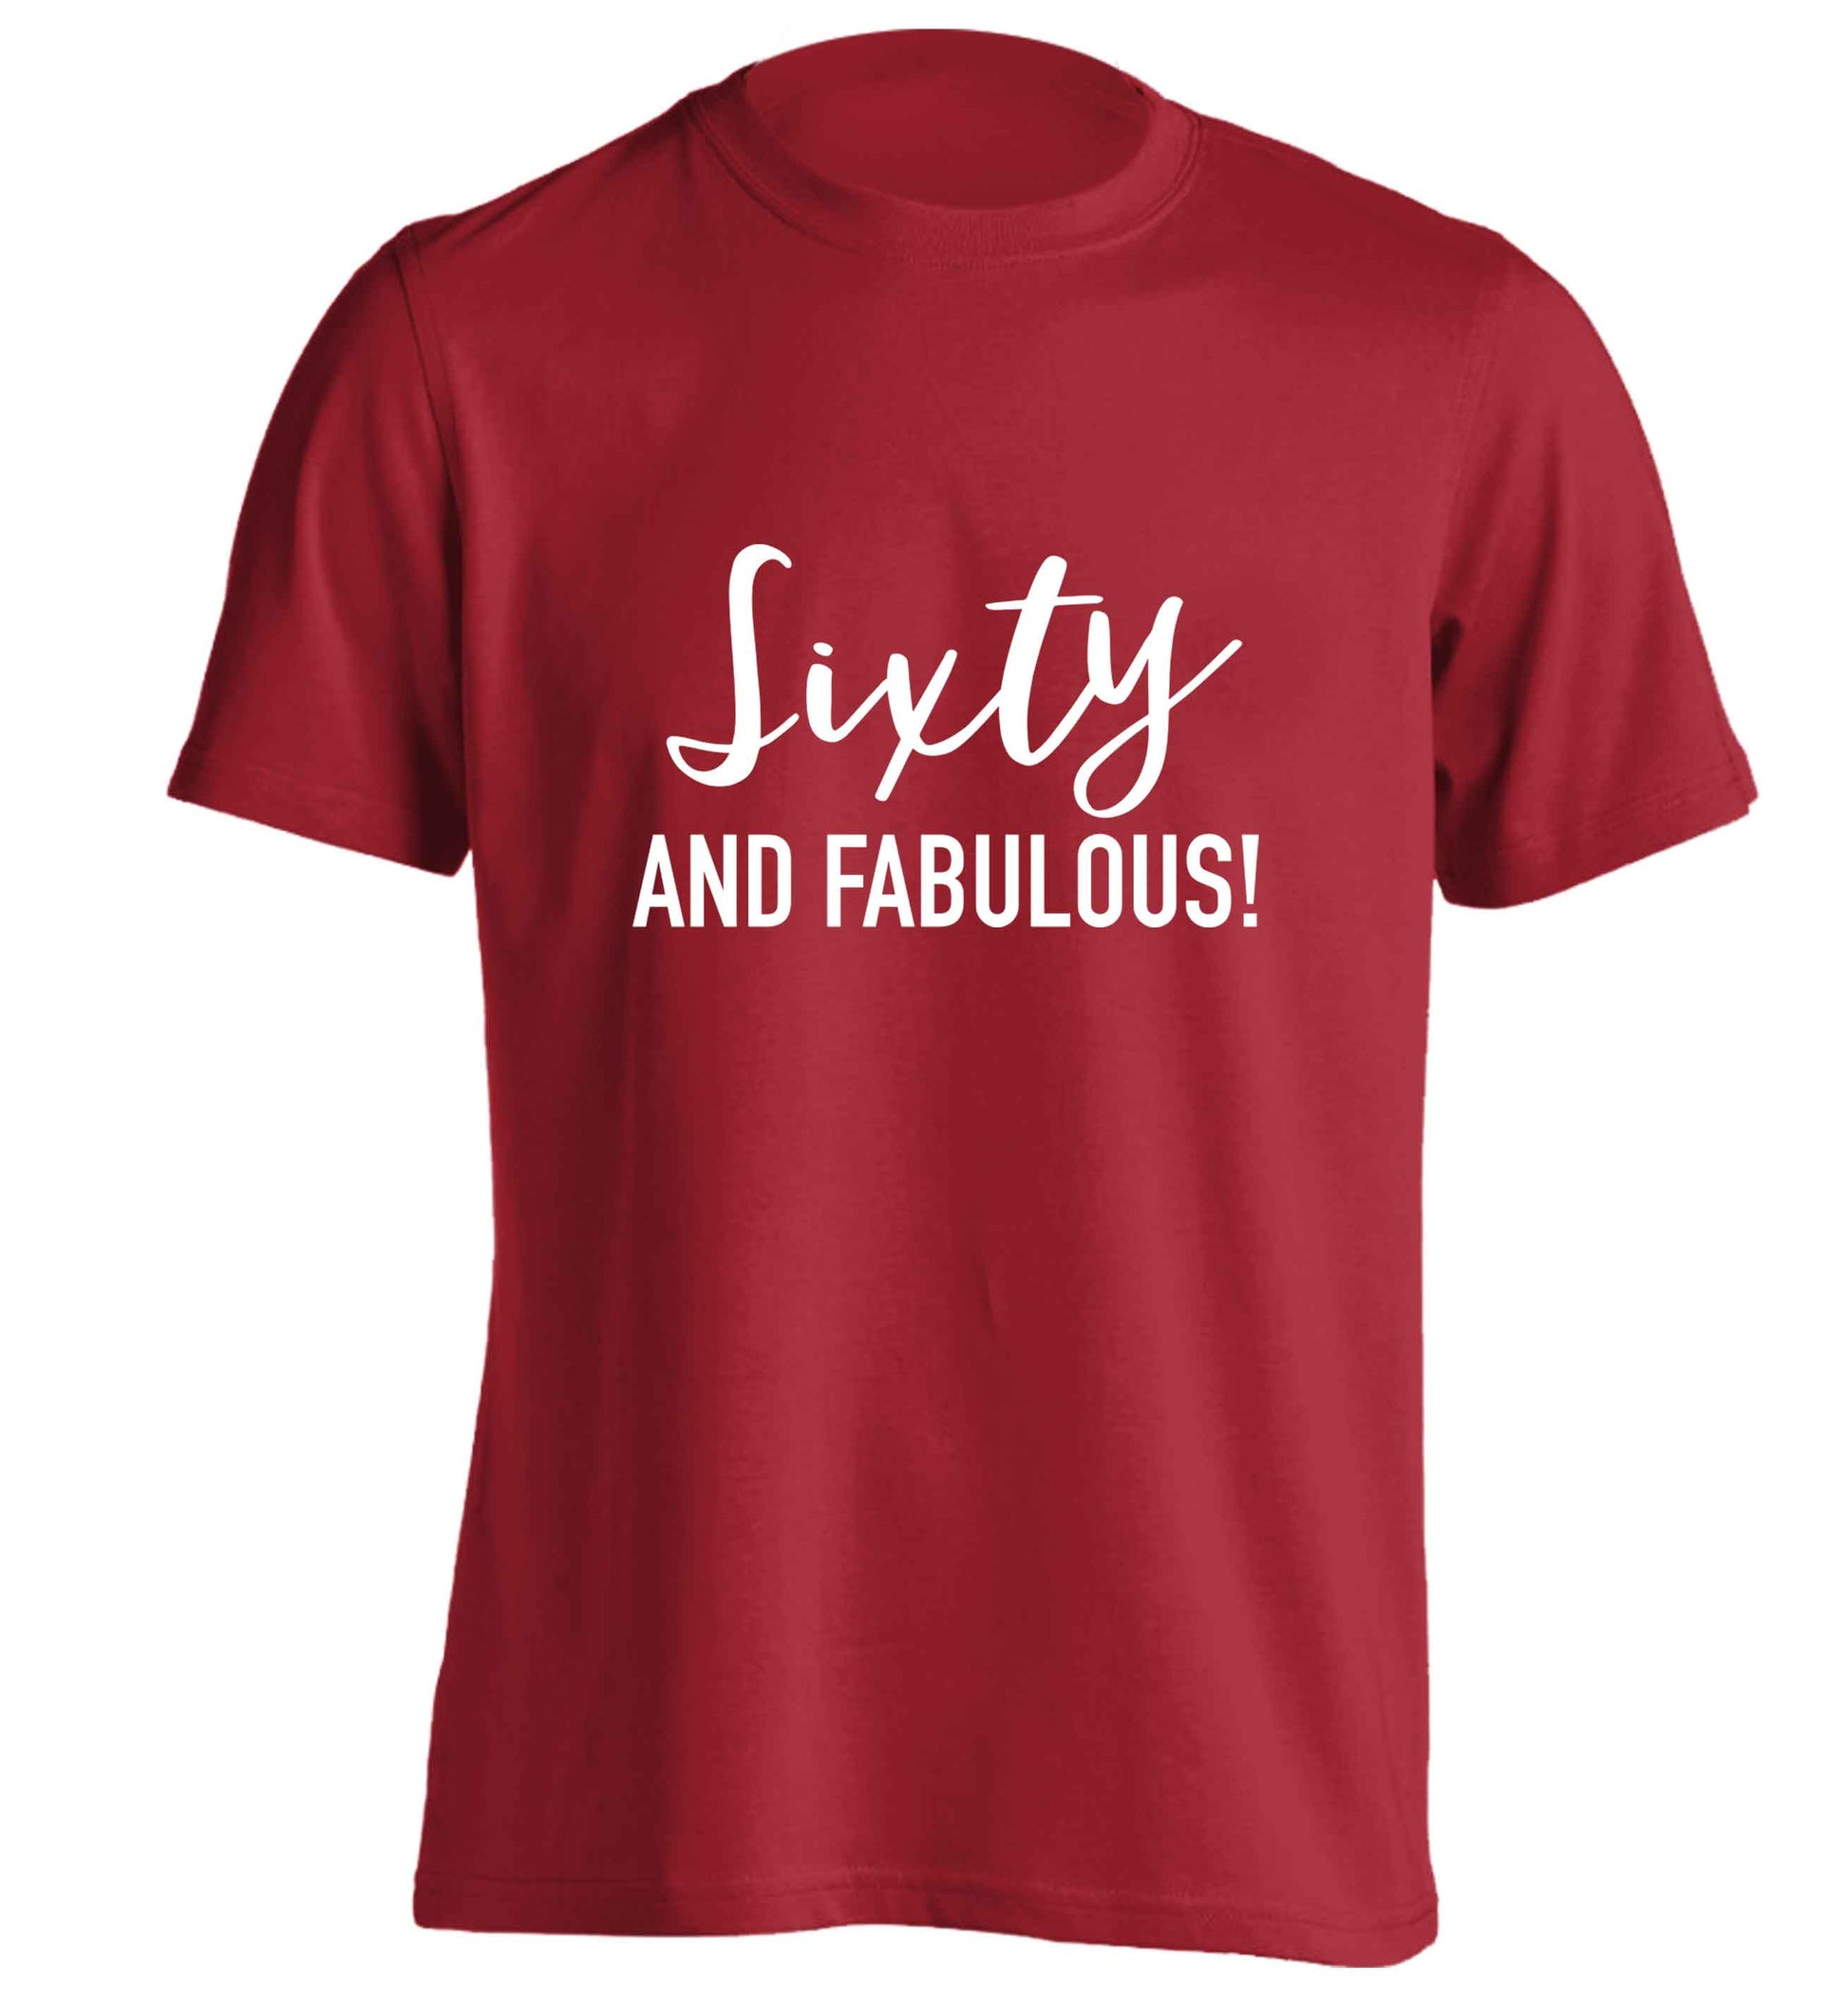 Sixty and fabulous adults unisex red Tshirt 2XL